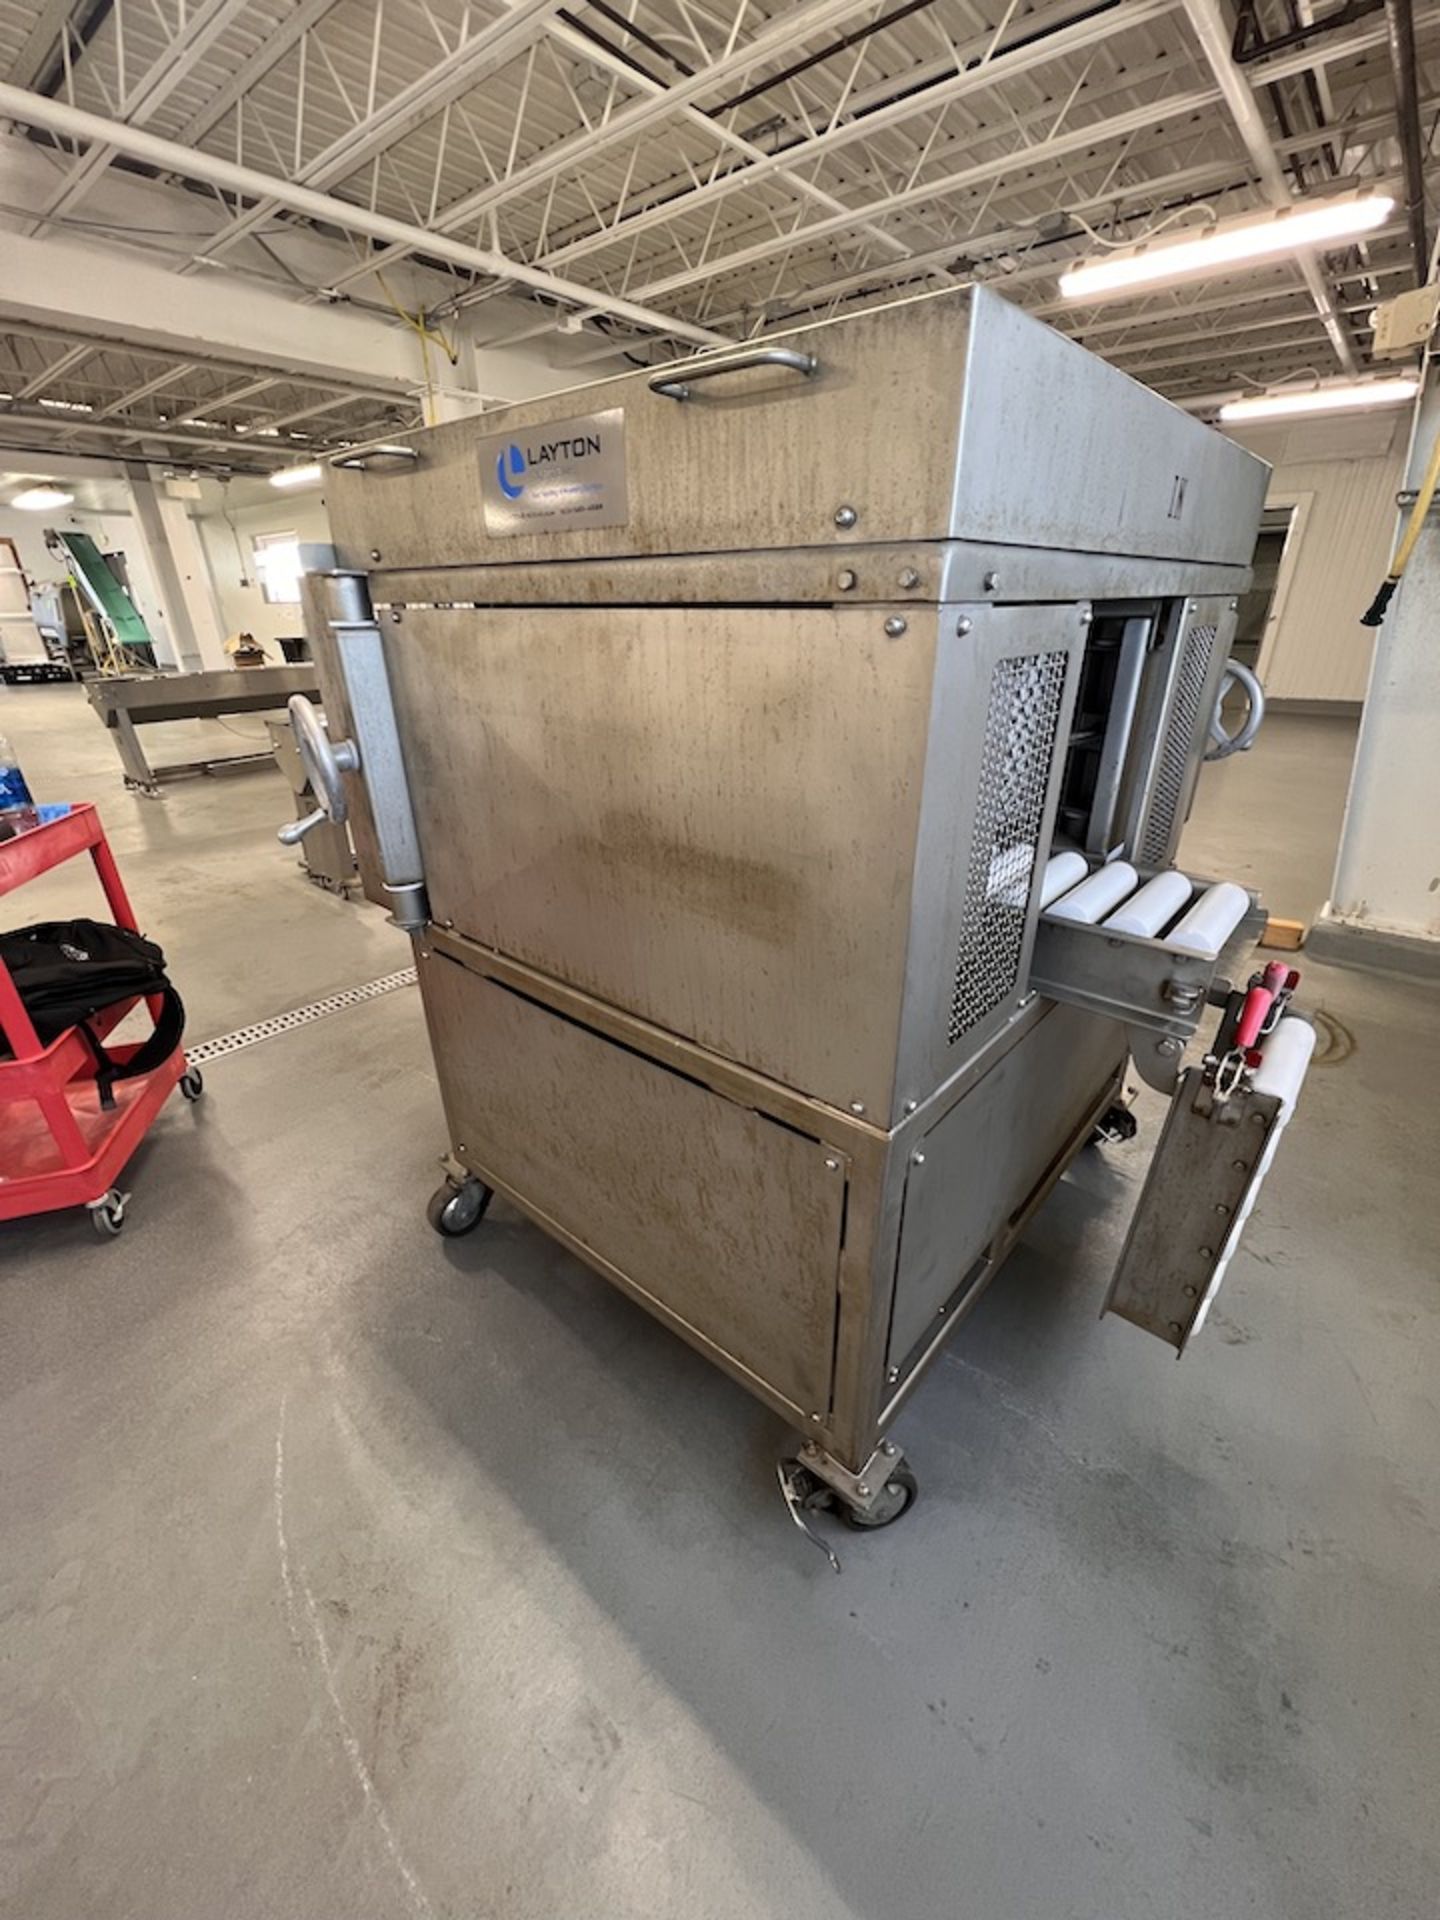 LAYTON BOX CRUSHER, DESIGNED TO CRUSH FROZEN FRUITS AND VEGETABLES CONTAINED IN CARDBOARD BOXES, - Image 11 of 11